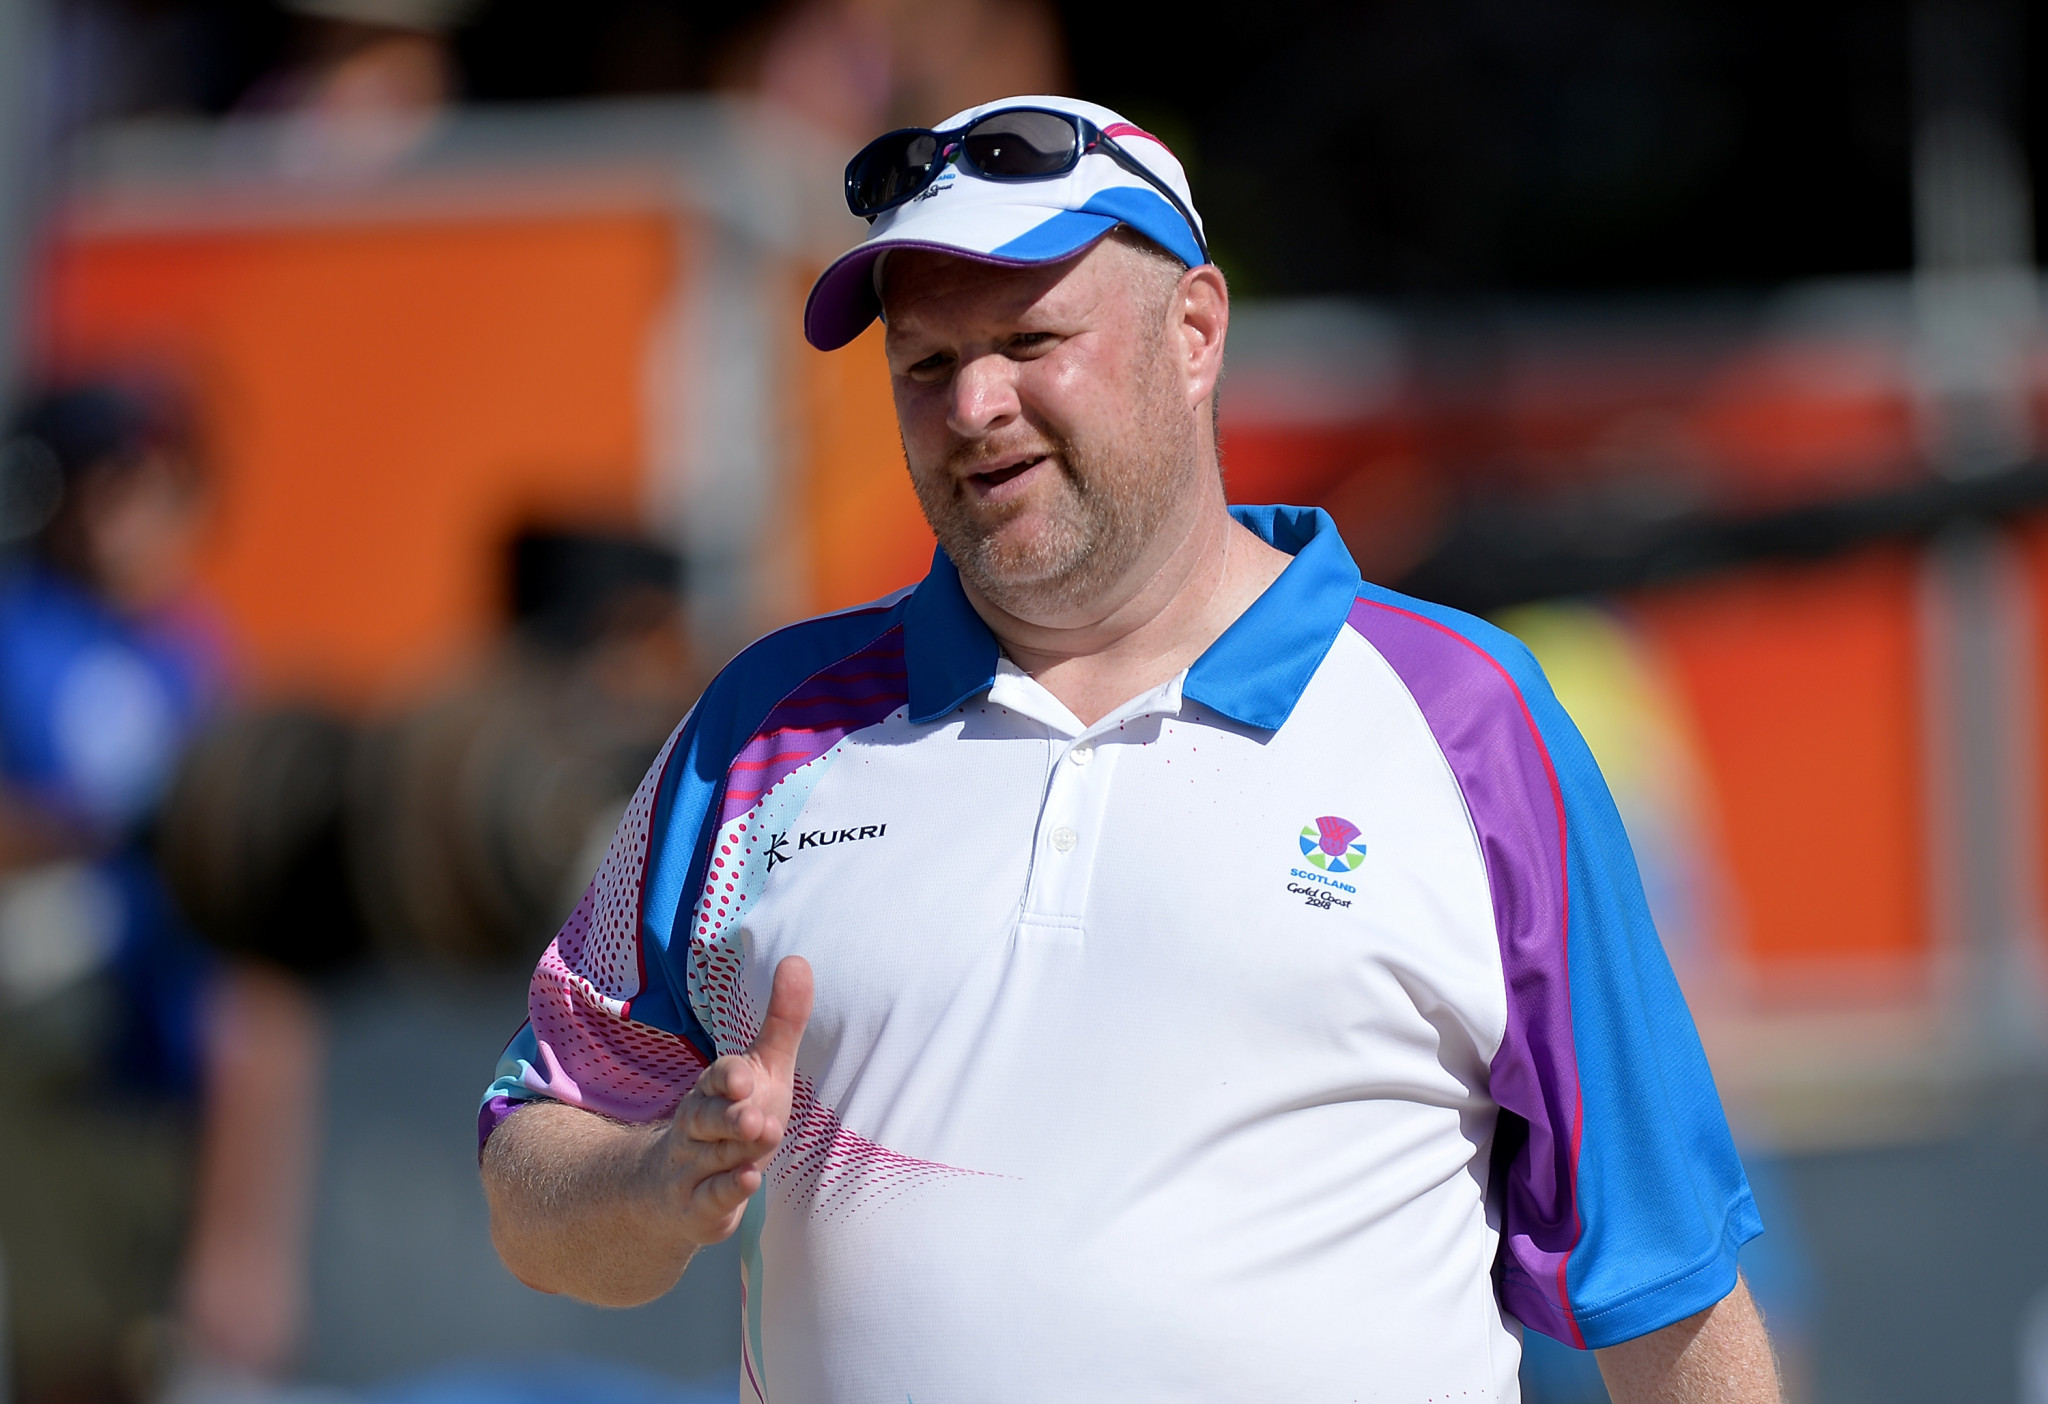 Scotland's Darren Burnett maintained his impressive form at the World Bowls Atlantic Championships in Cardiff ©Getty Images